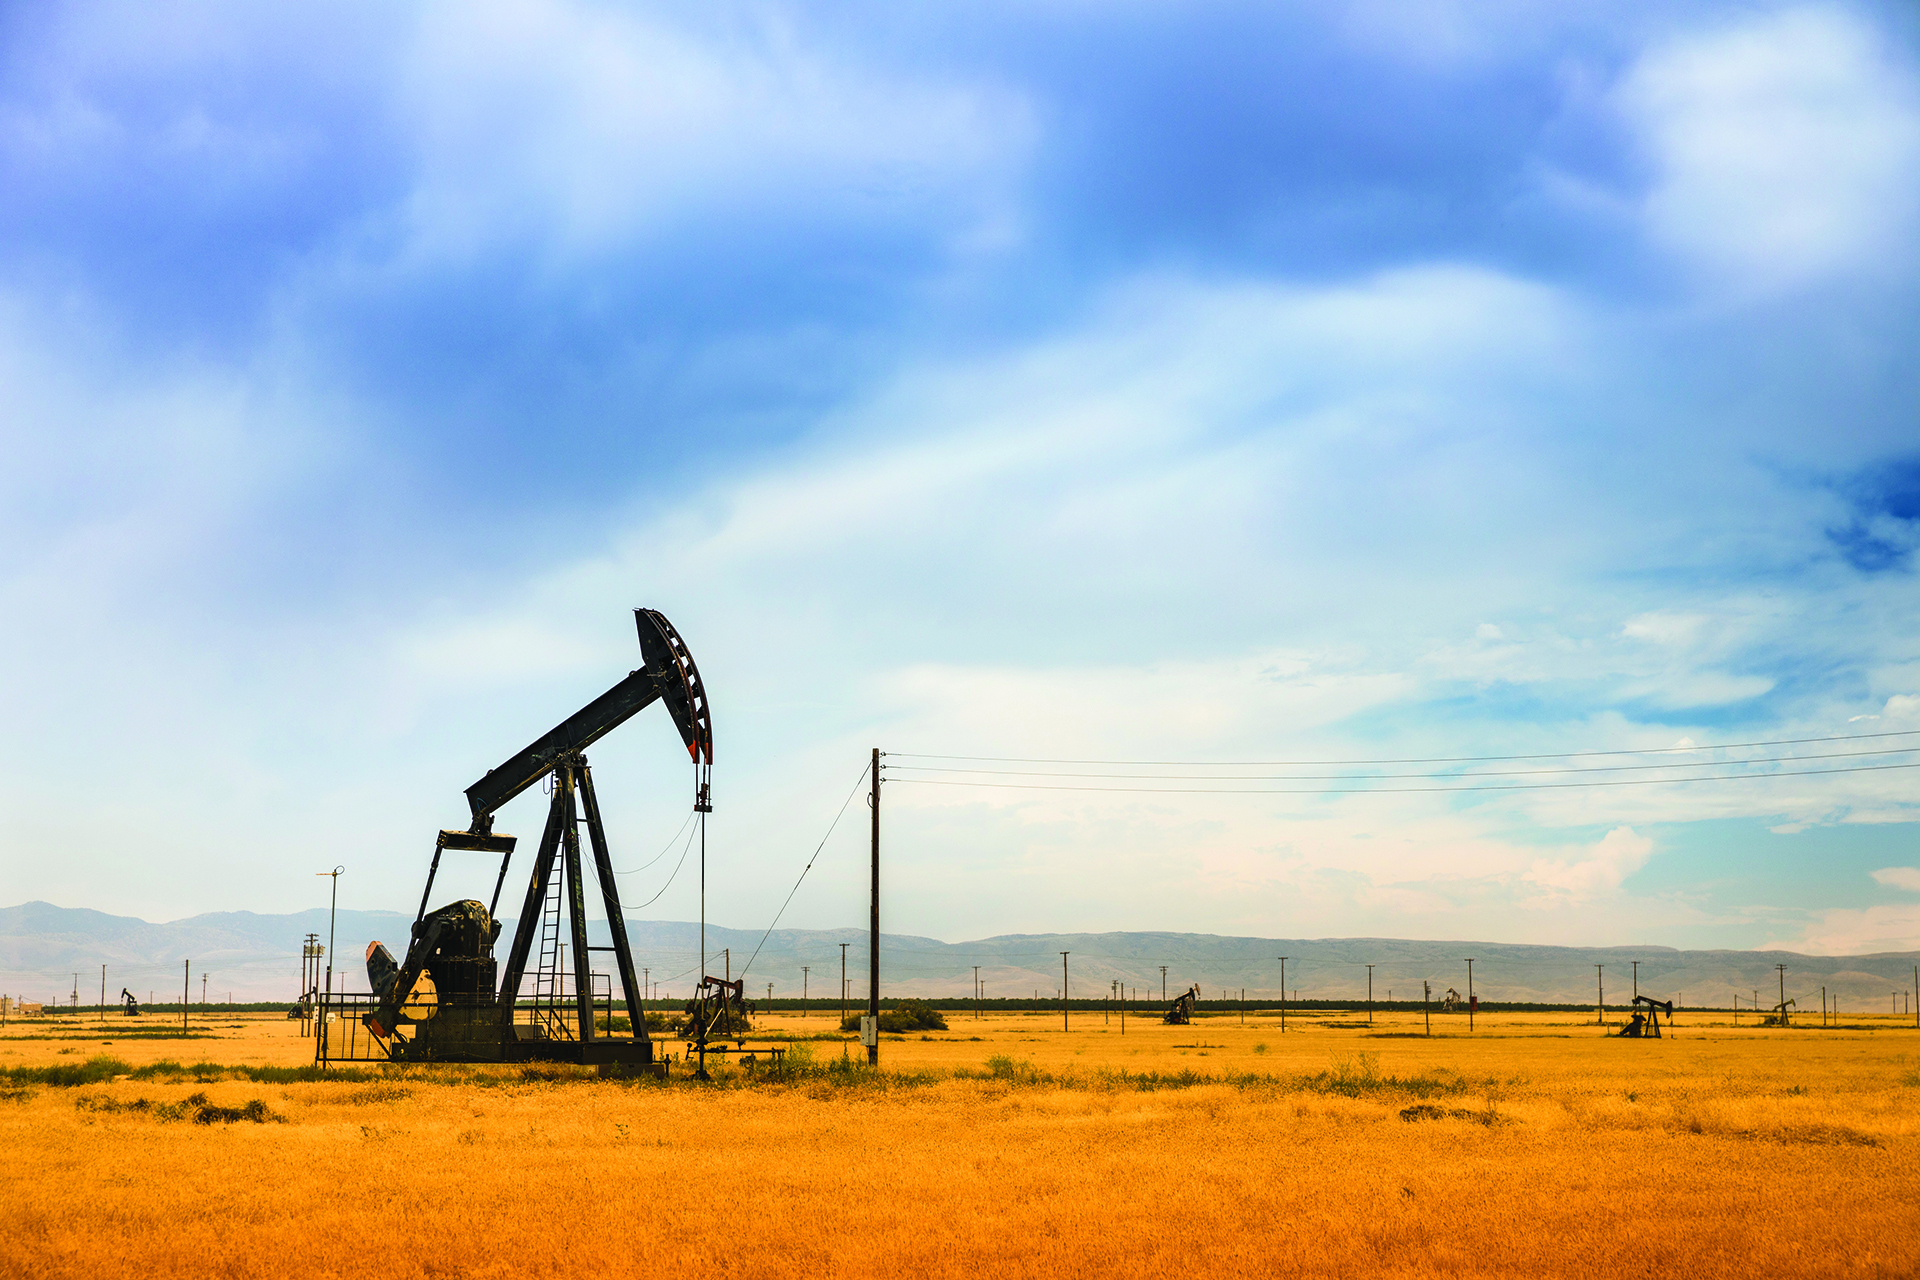 Pumpjack lifts oil from a well